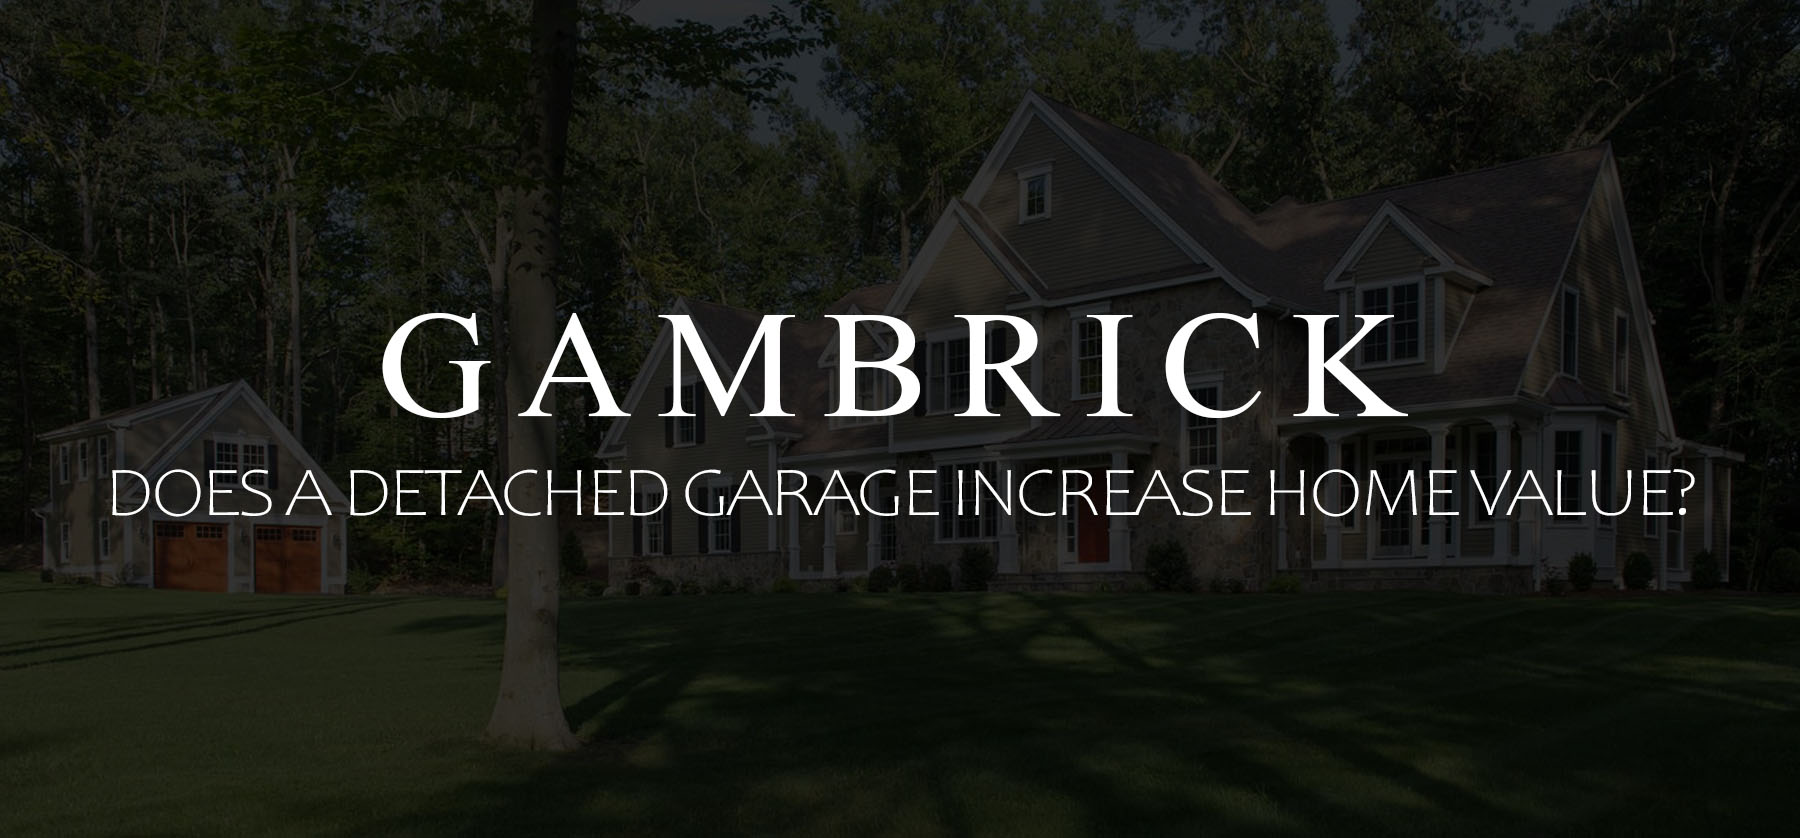 A Detached Garage Increase Home Value, Does A Detached Garage Increase Home Value